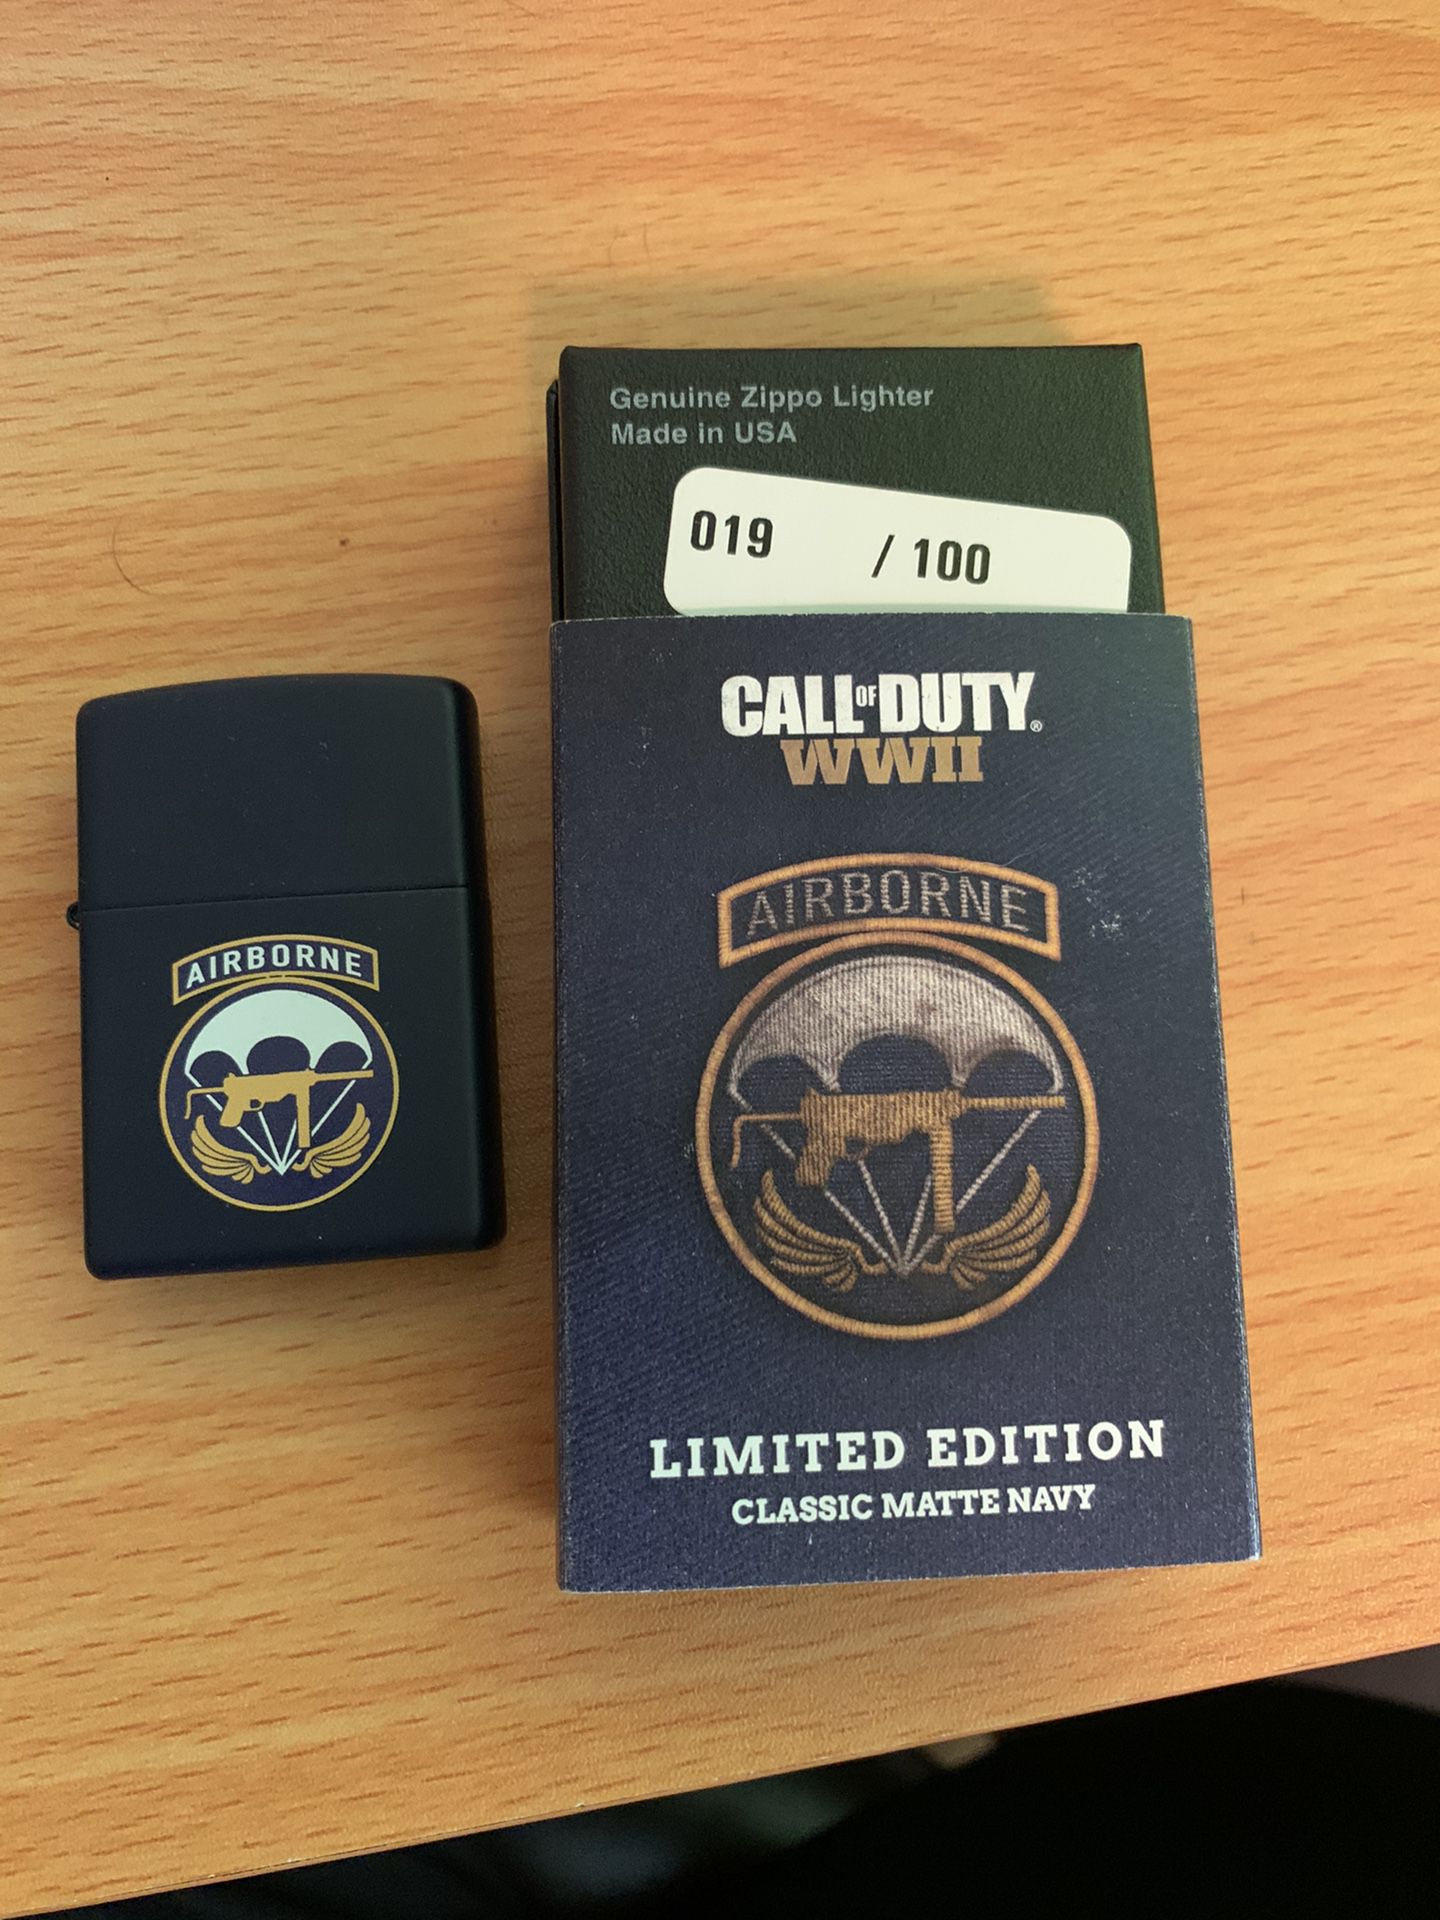 Call of duty Zippo 19/100 *NEED GONE! MAKE OFFER*